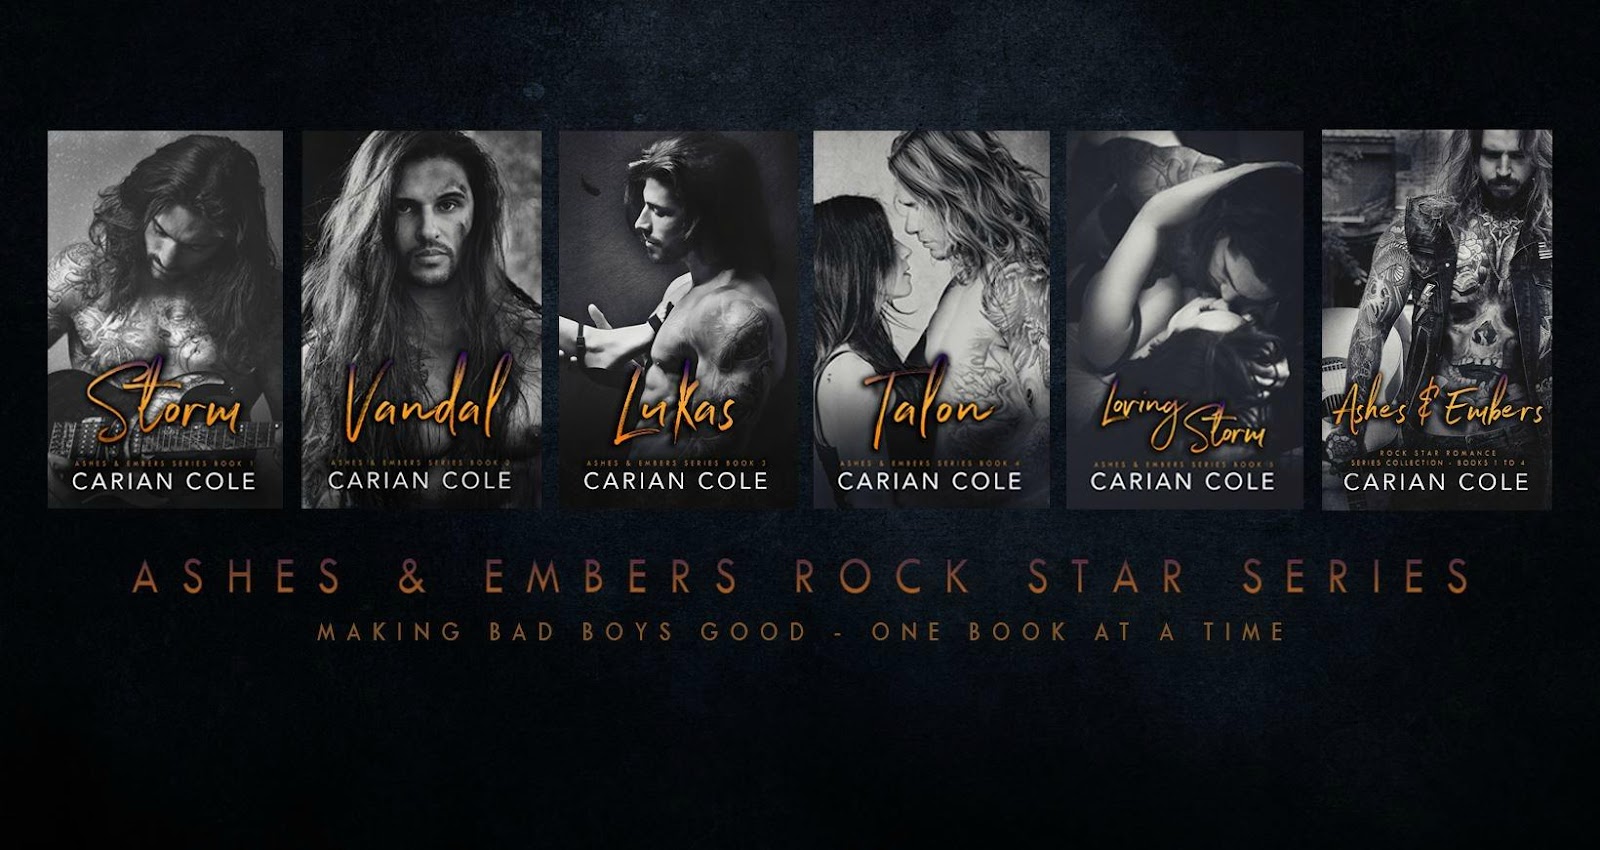 https://www.forewordpr.com/wp-content/uploads/2019/04/Ashes-Embers-Rock-Star-Series-graphic.jpg